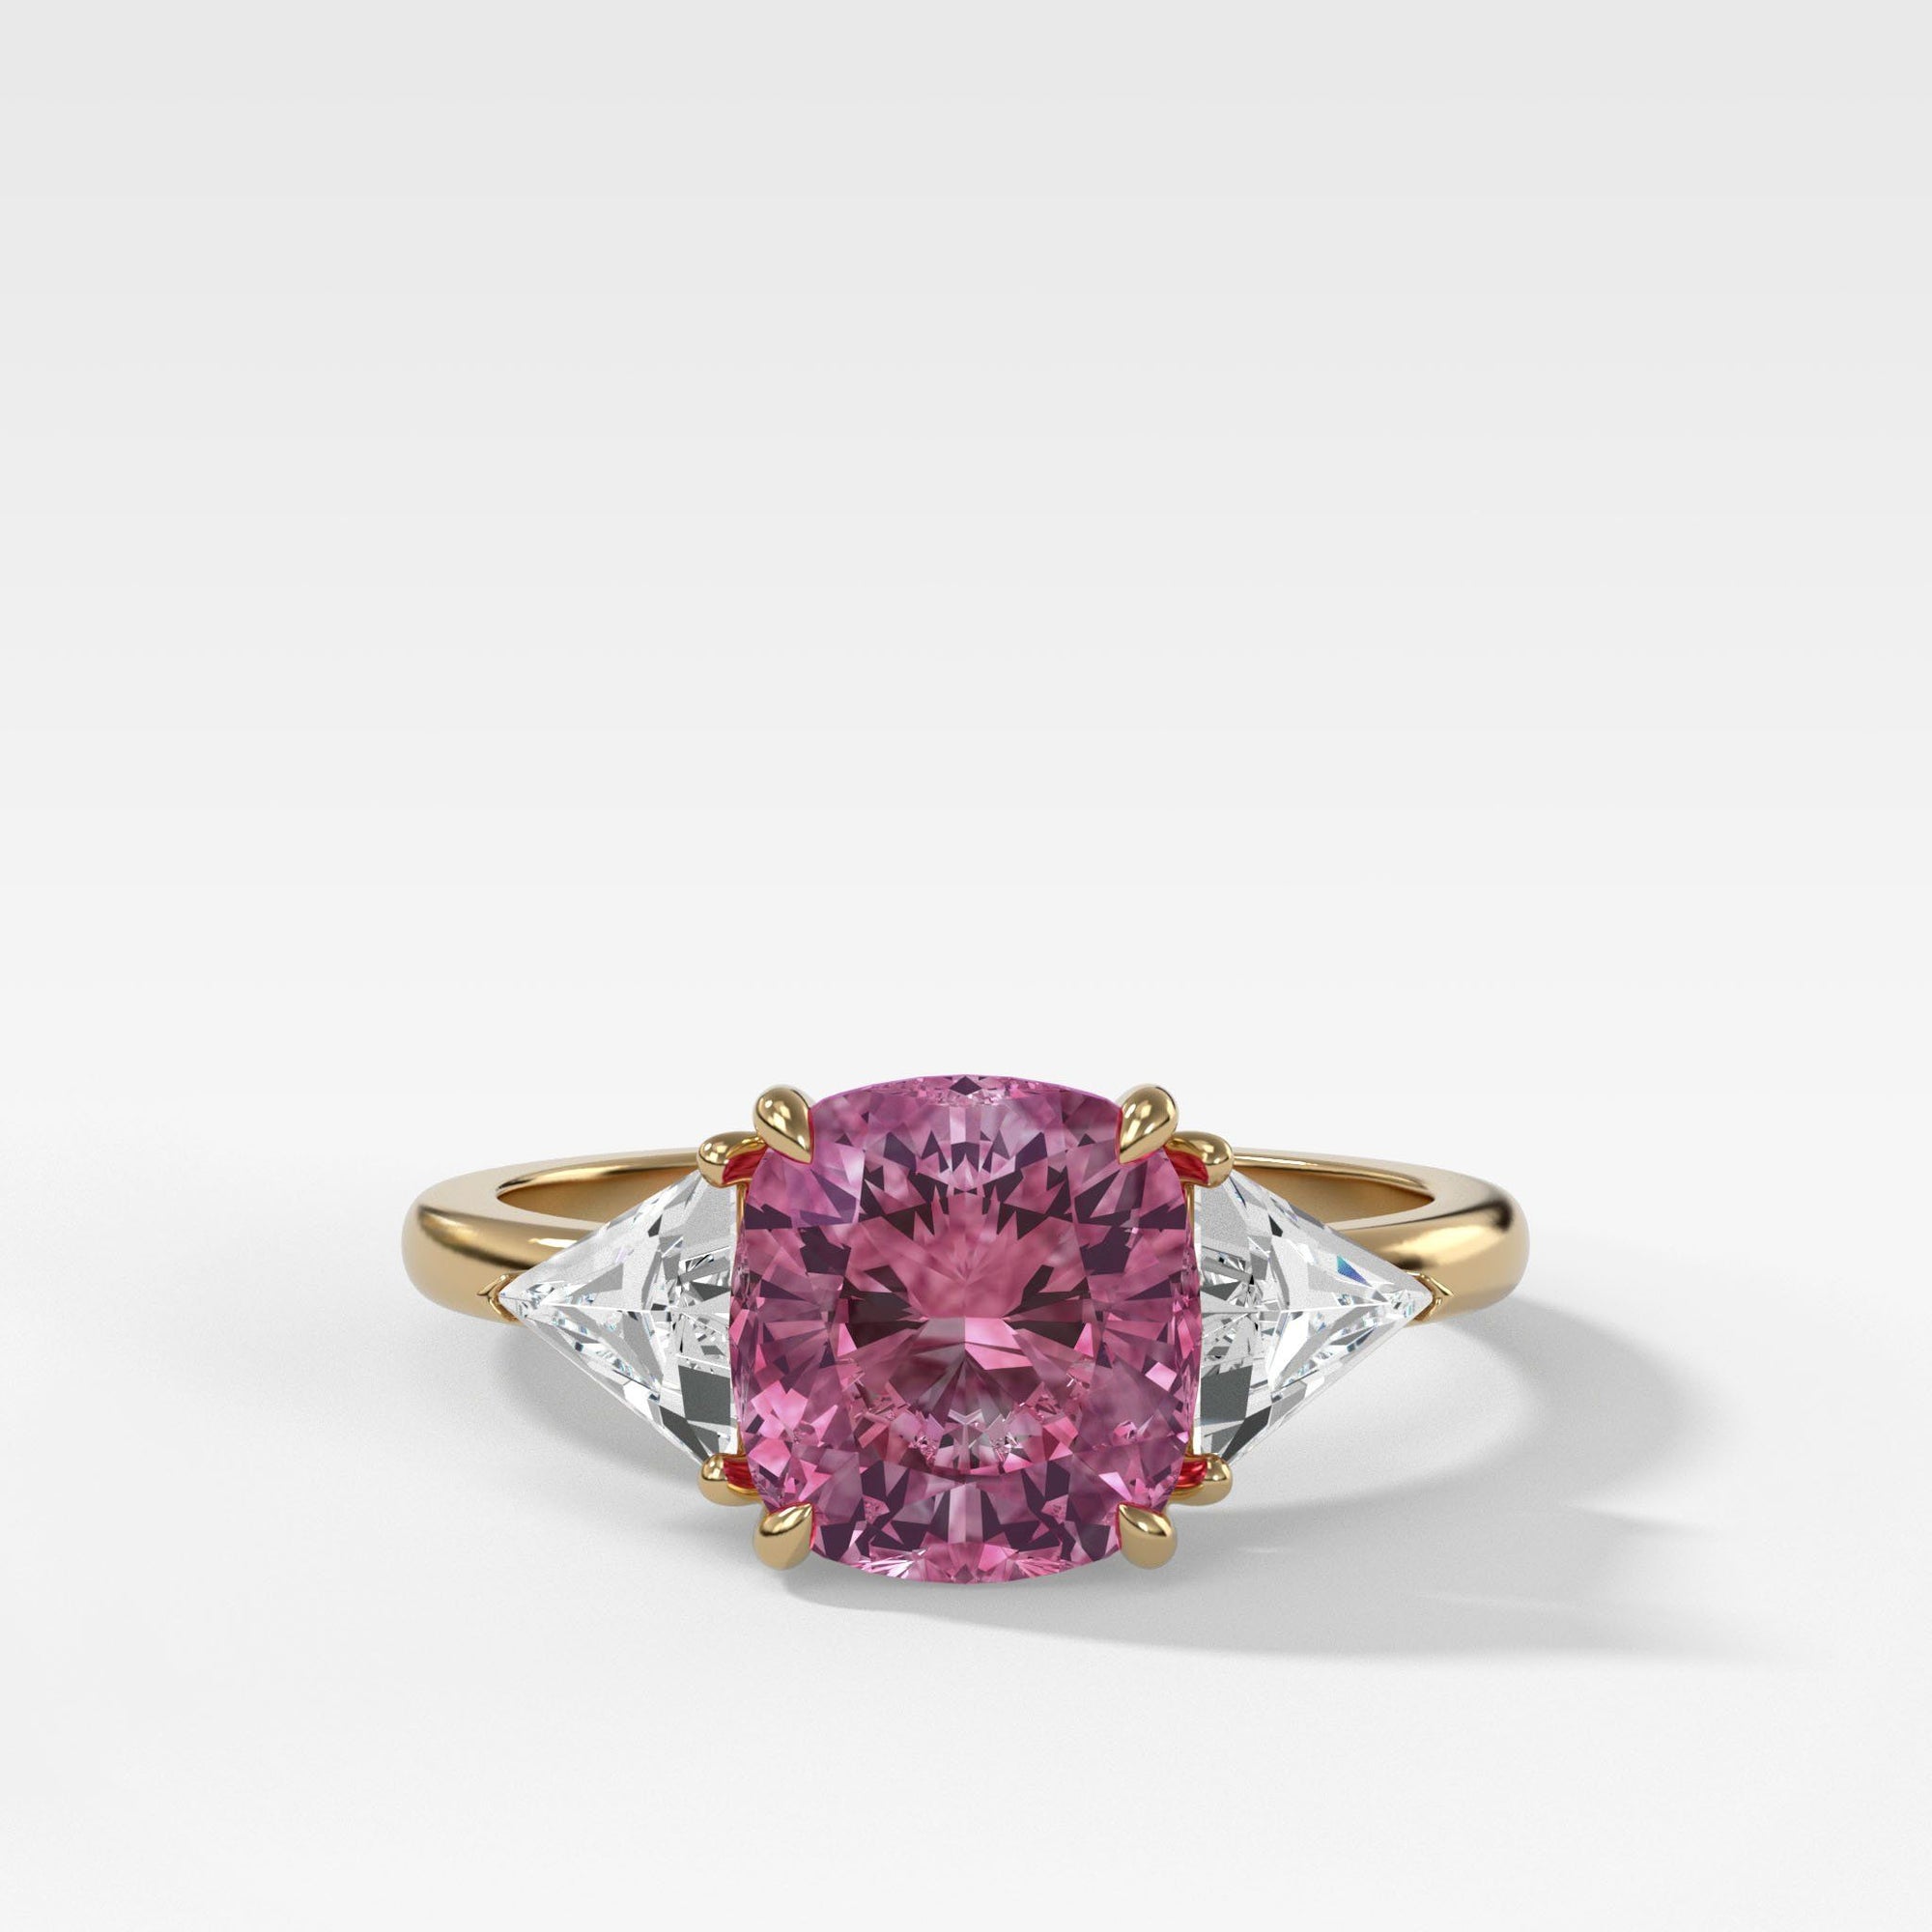 Vintage 2.35ct Pink Sapphire Three Stone Ring with Trillion Diamond Sides by Good Stone in Yellow Gold